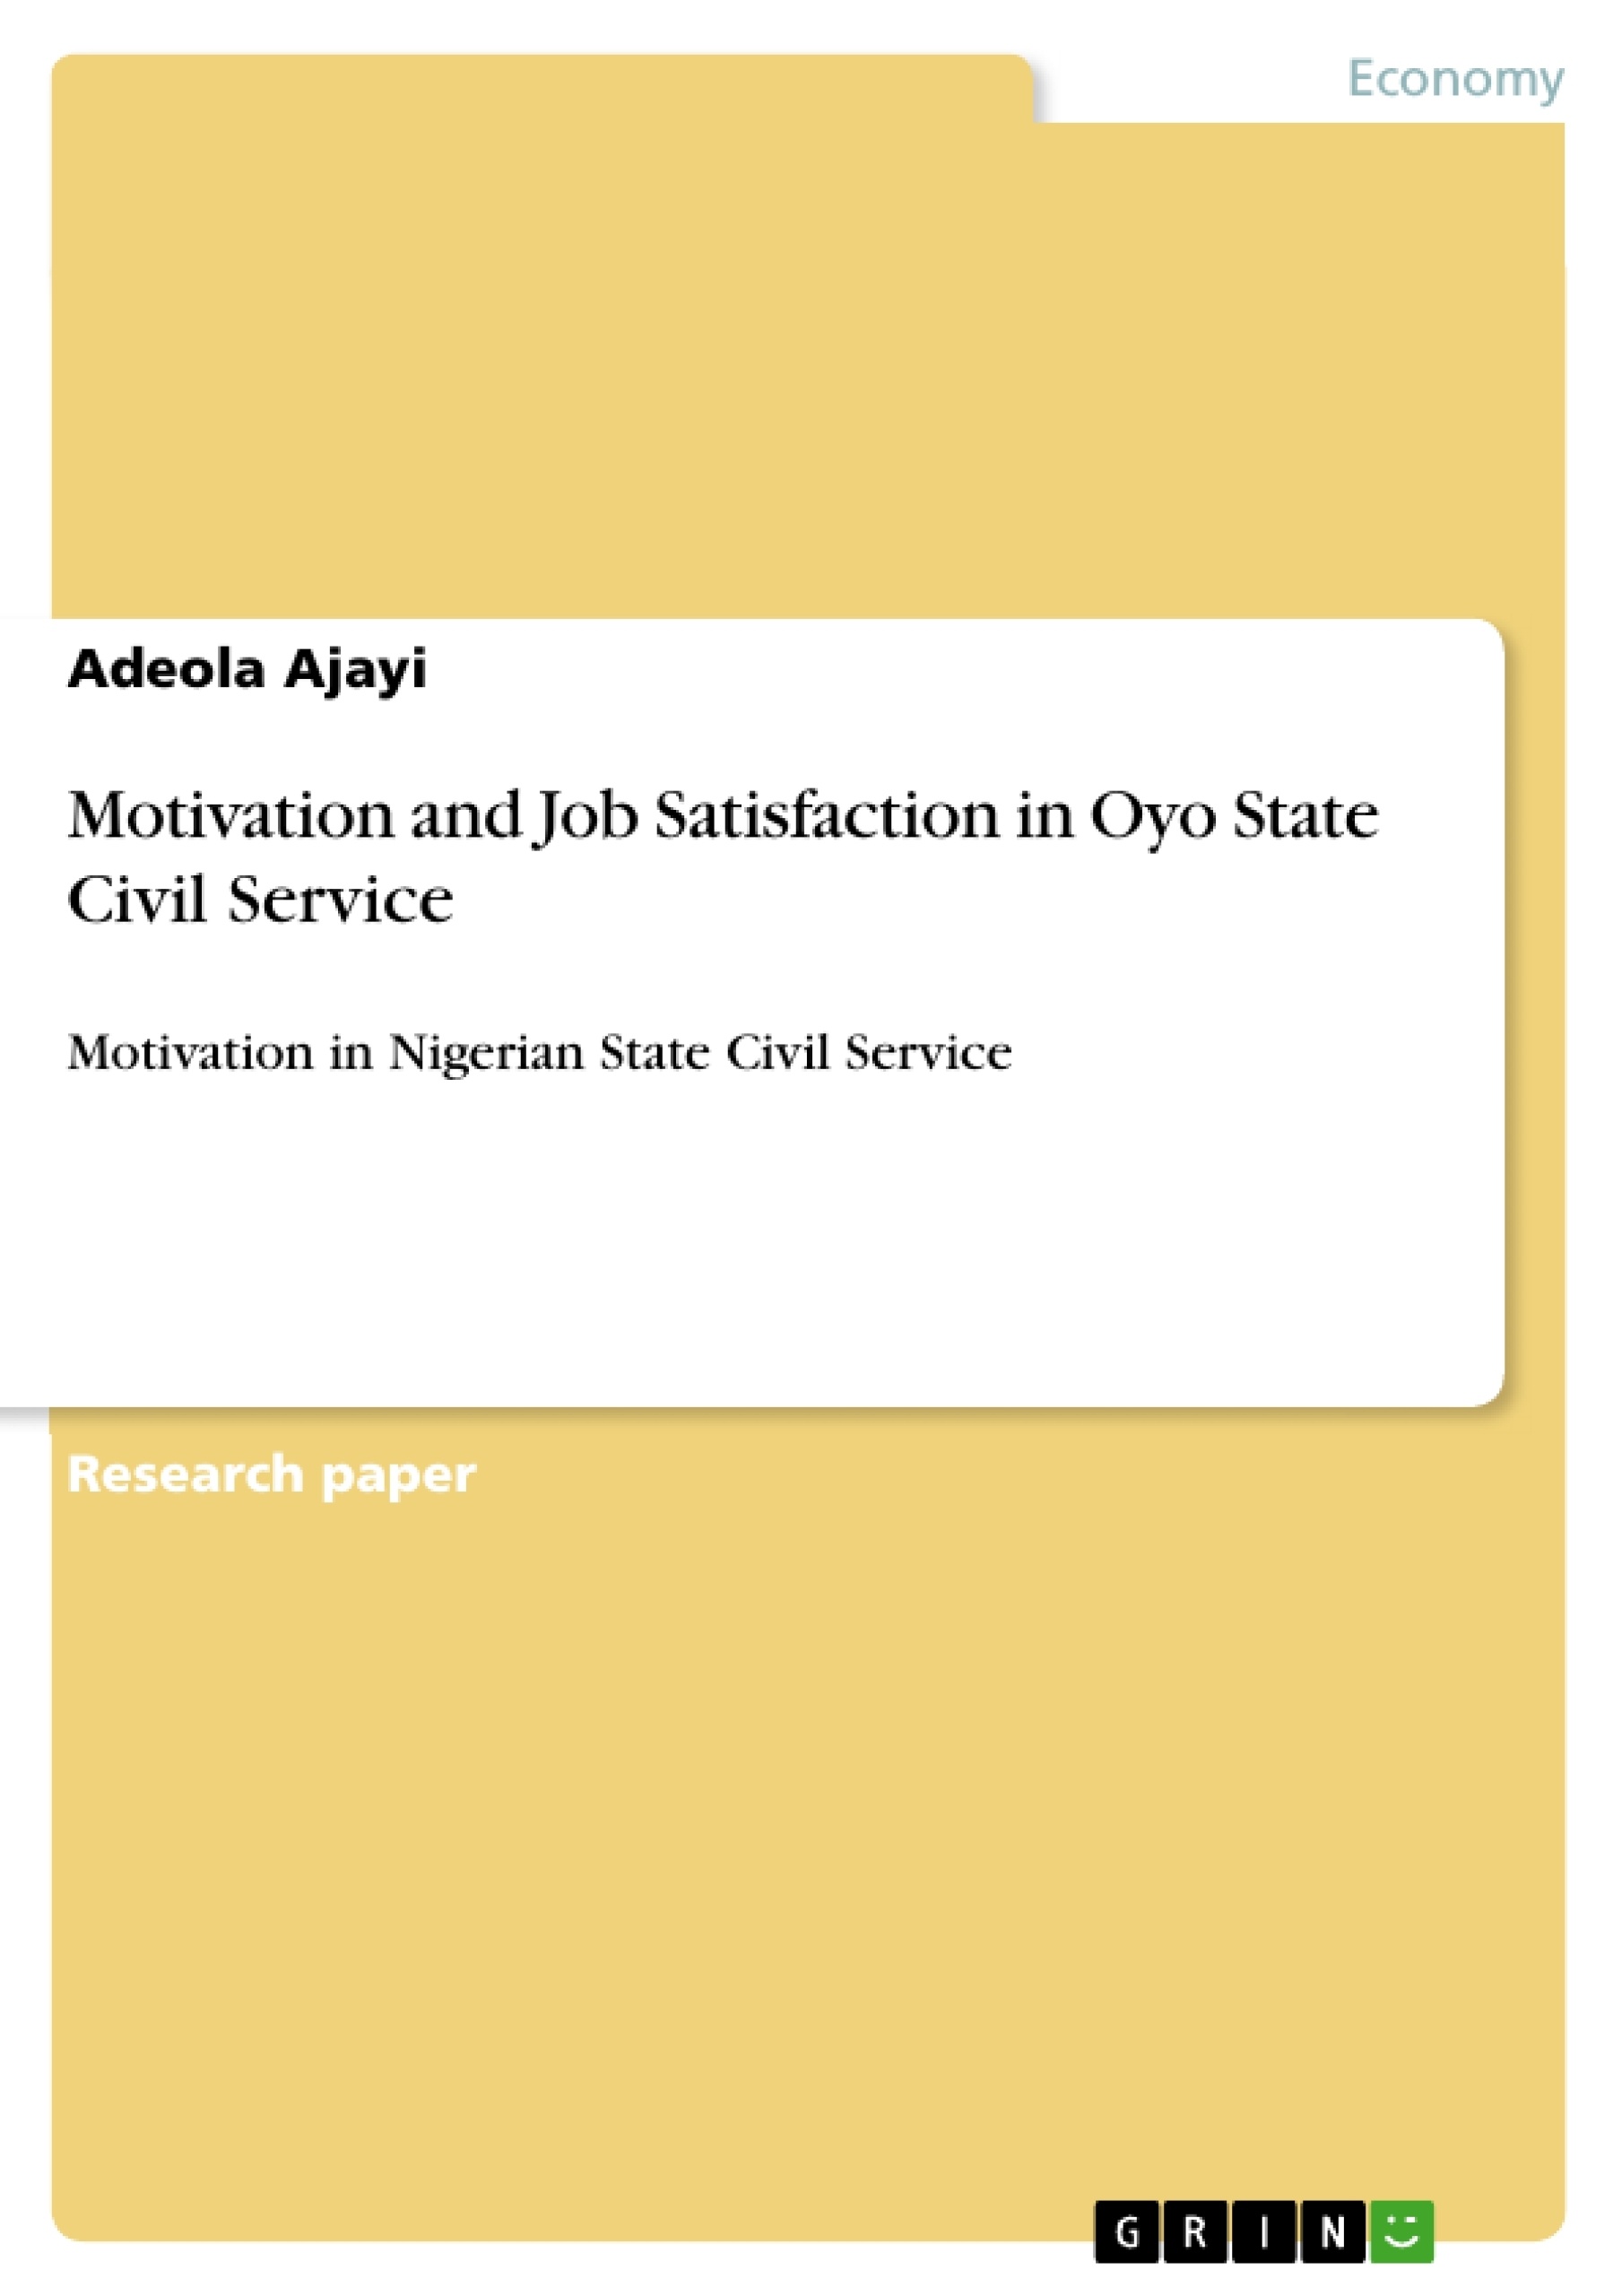 Título: Motivation and Job Satisfaction in Oyo State Civil Service